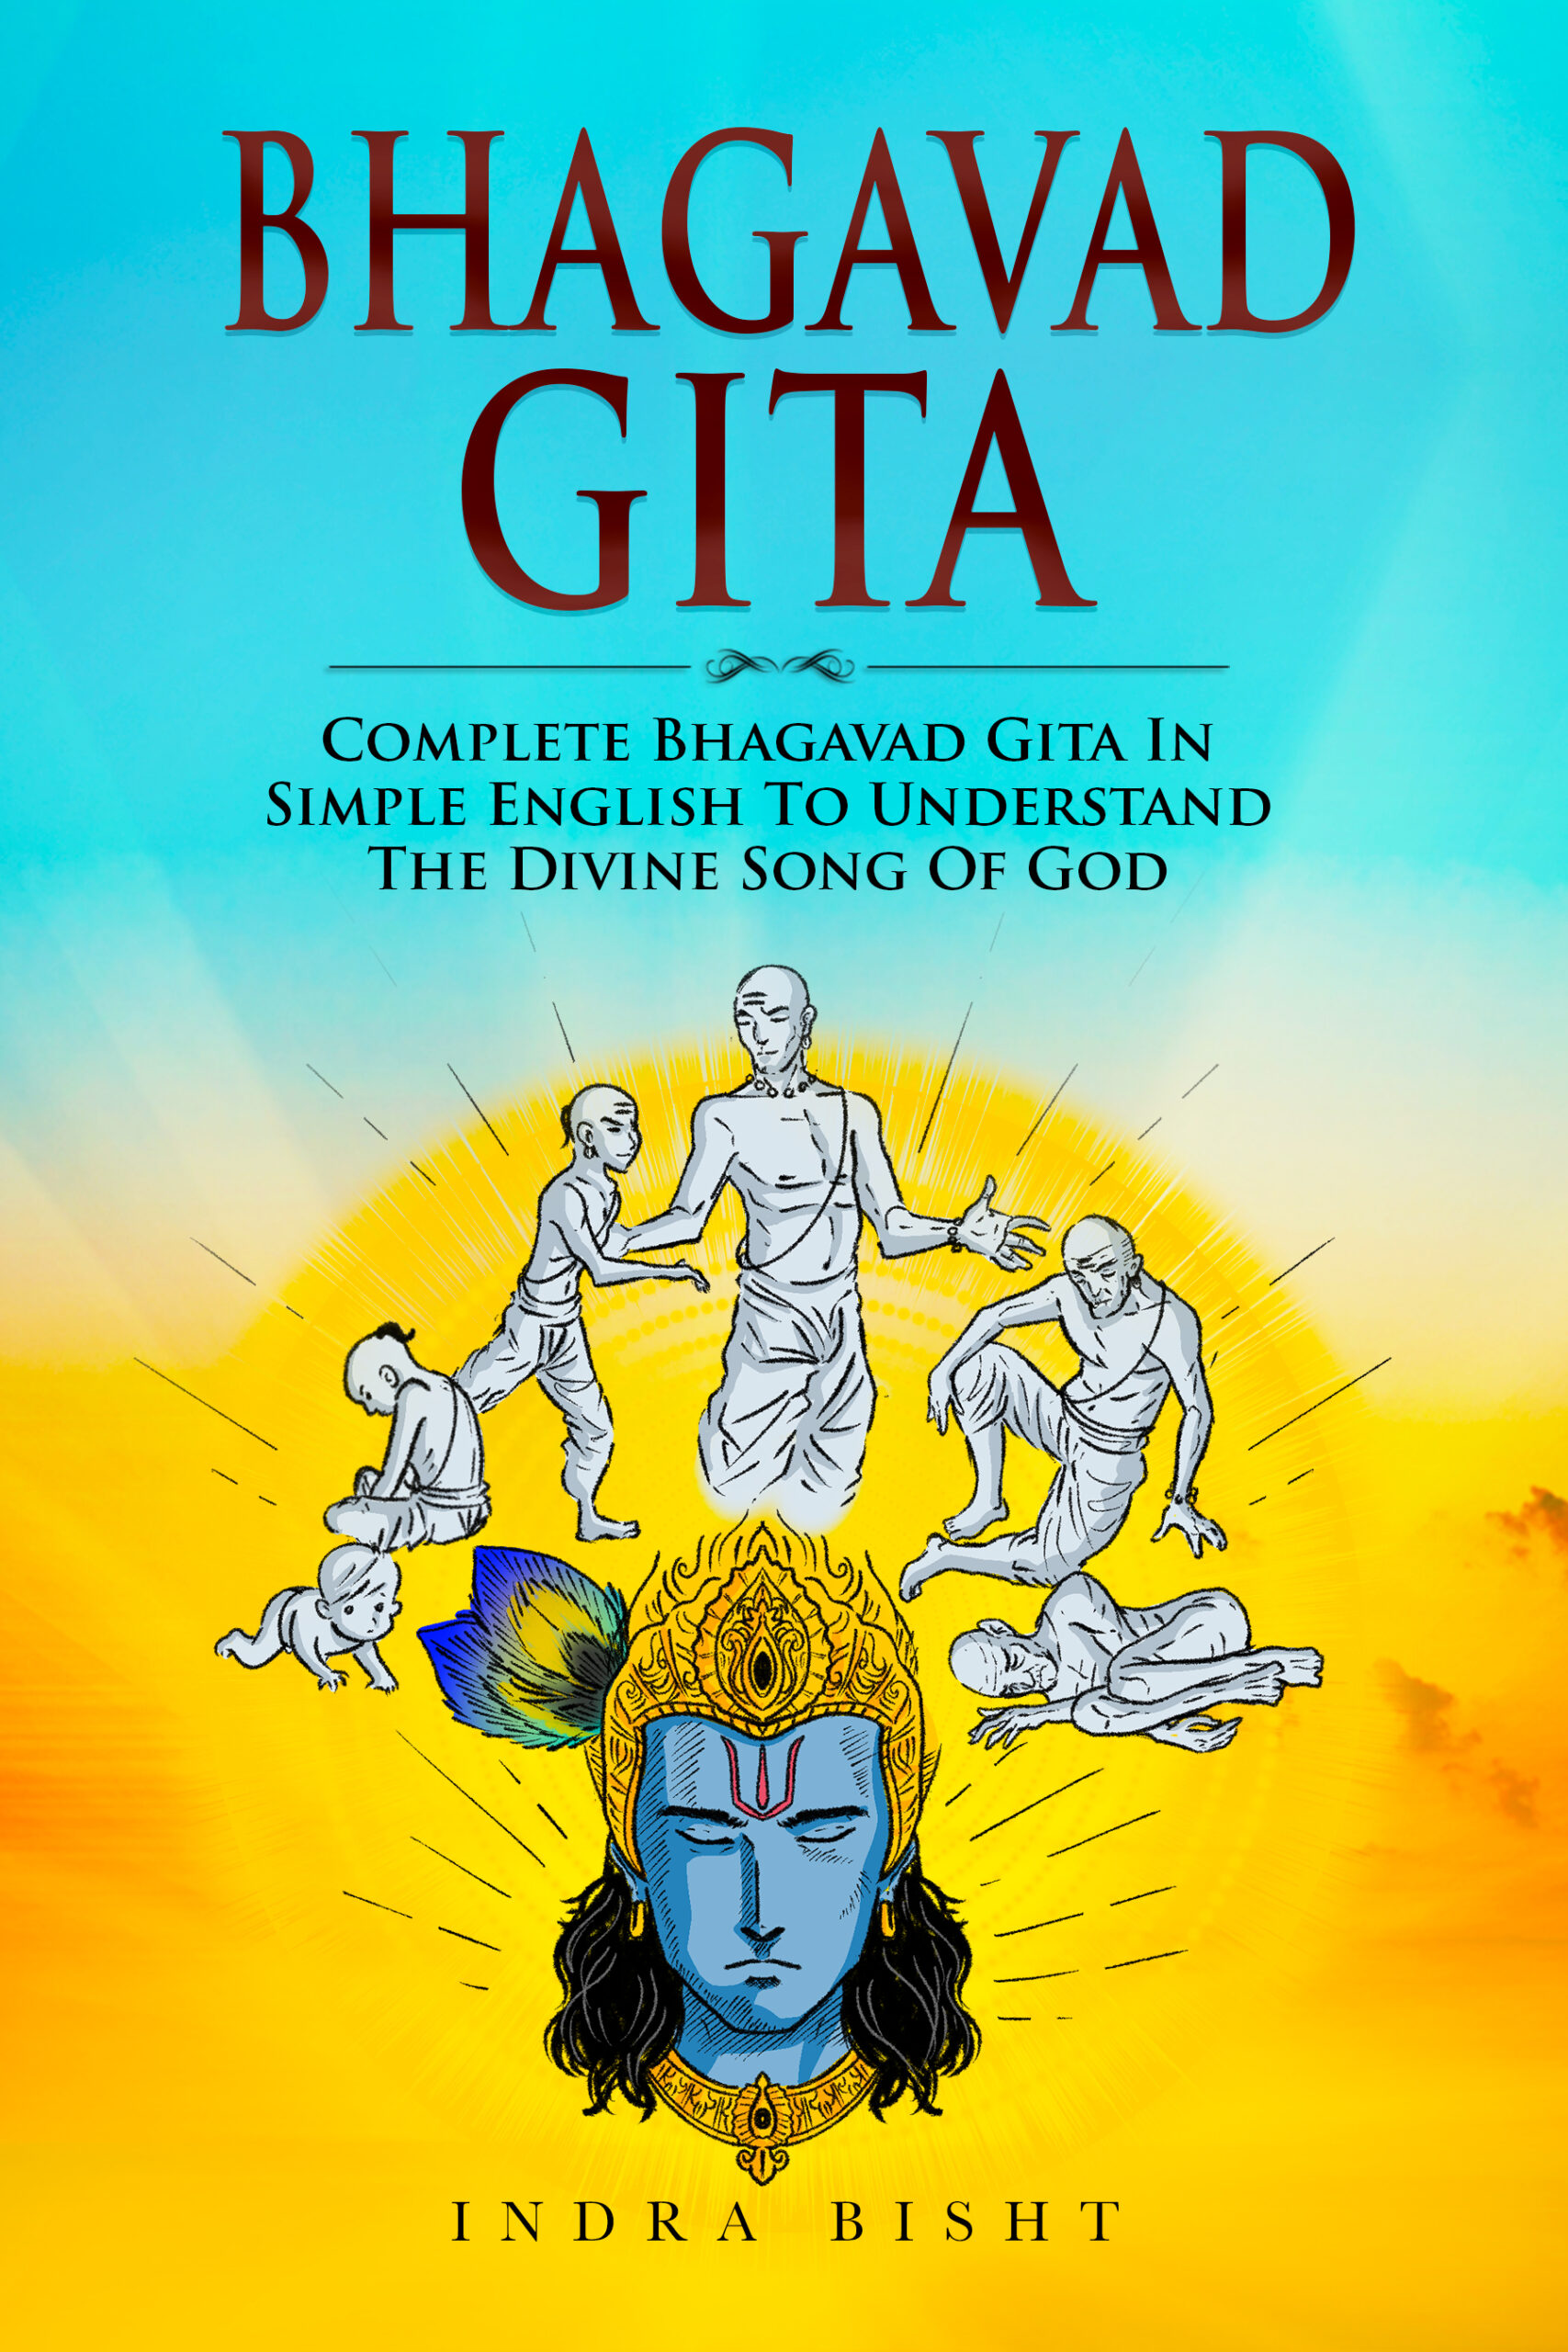 FREE: Bhagavad Gita : Complete Bhagavad Gita In Simple English To Understand The Divine Song Of God by Indra Bisht